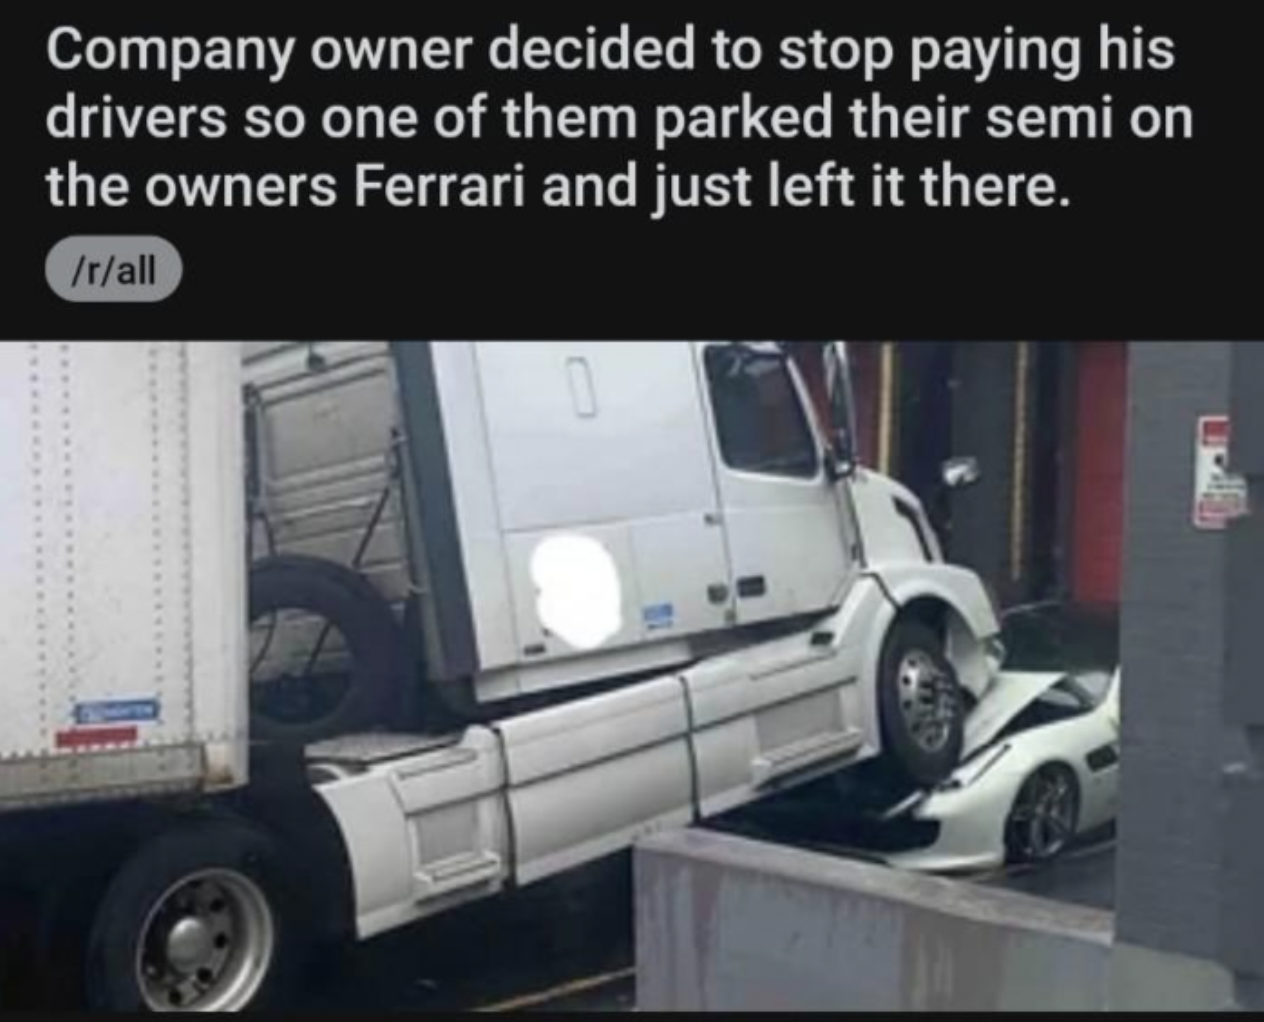 Ferrari S.p.A. - Company owner decided to stop paying his drivers so one of them parked their semi on the owners Ferrari and just left it there. rall 0